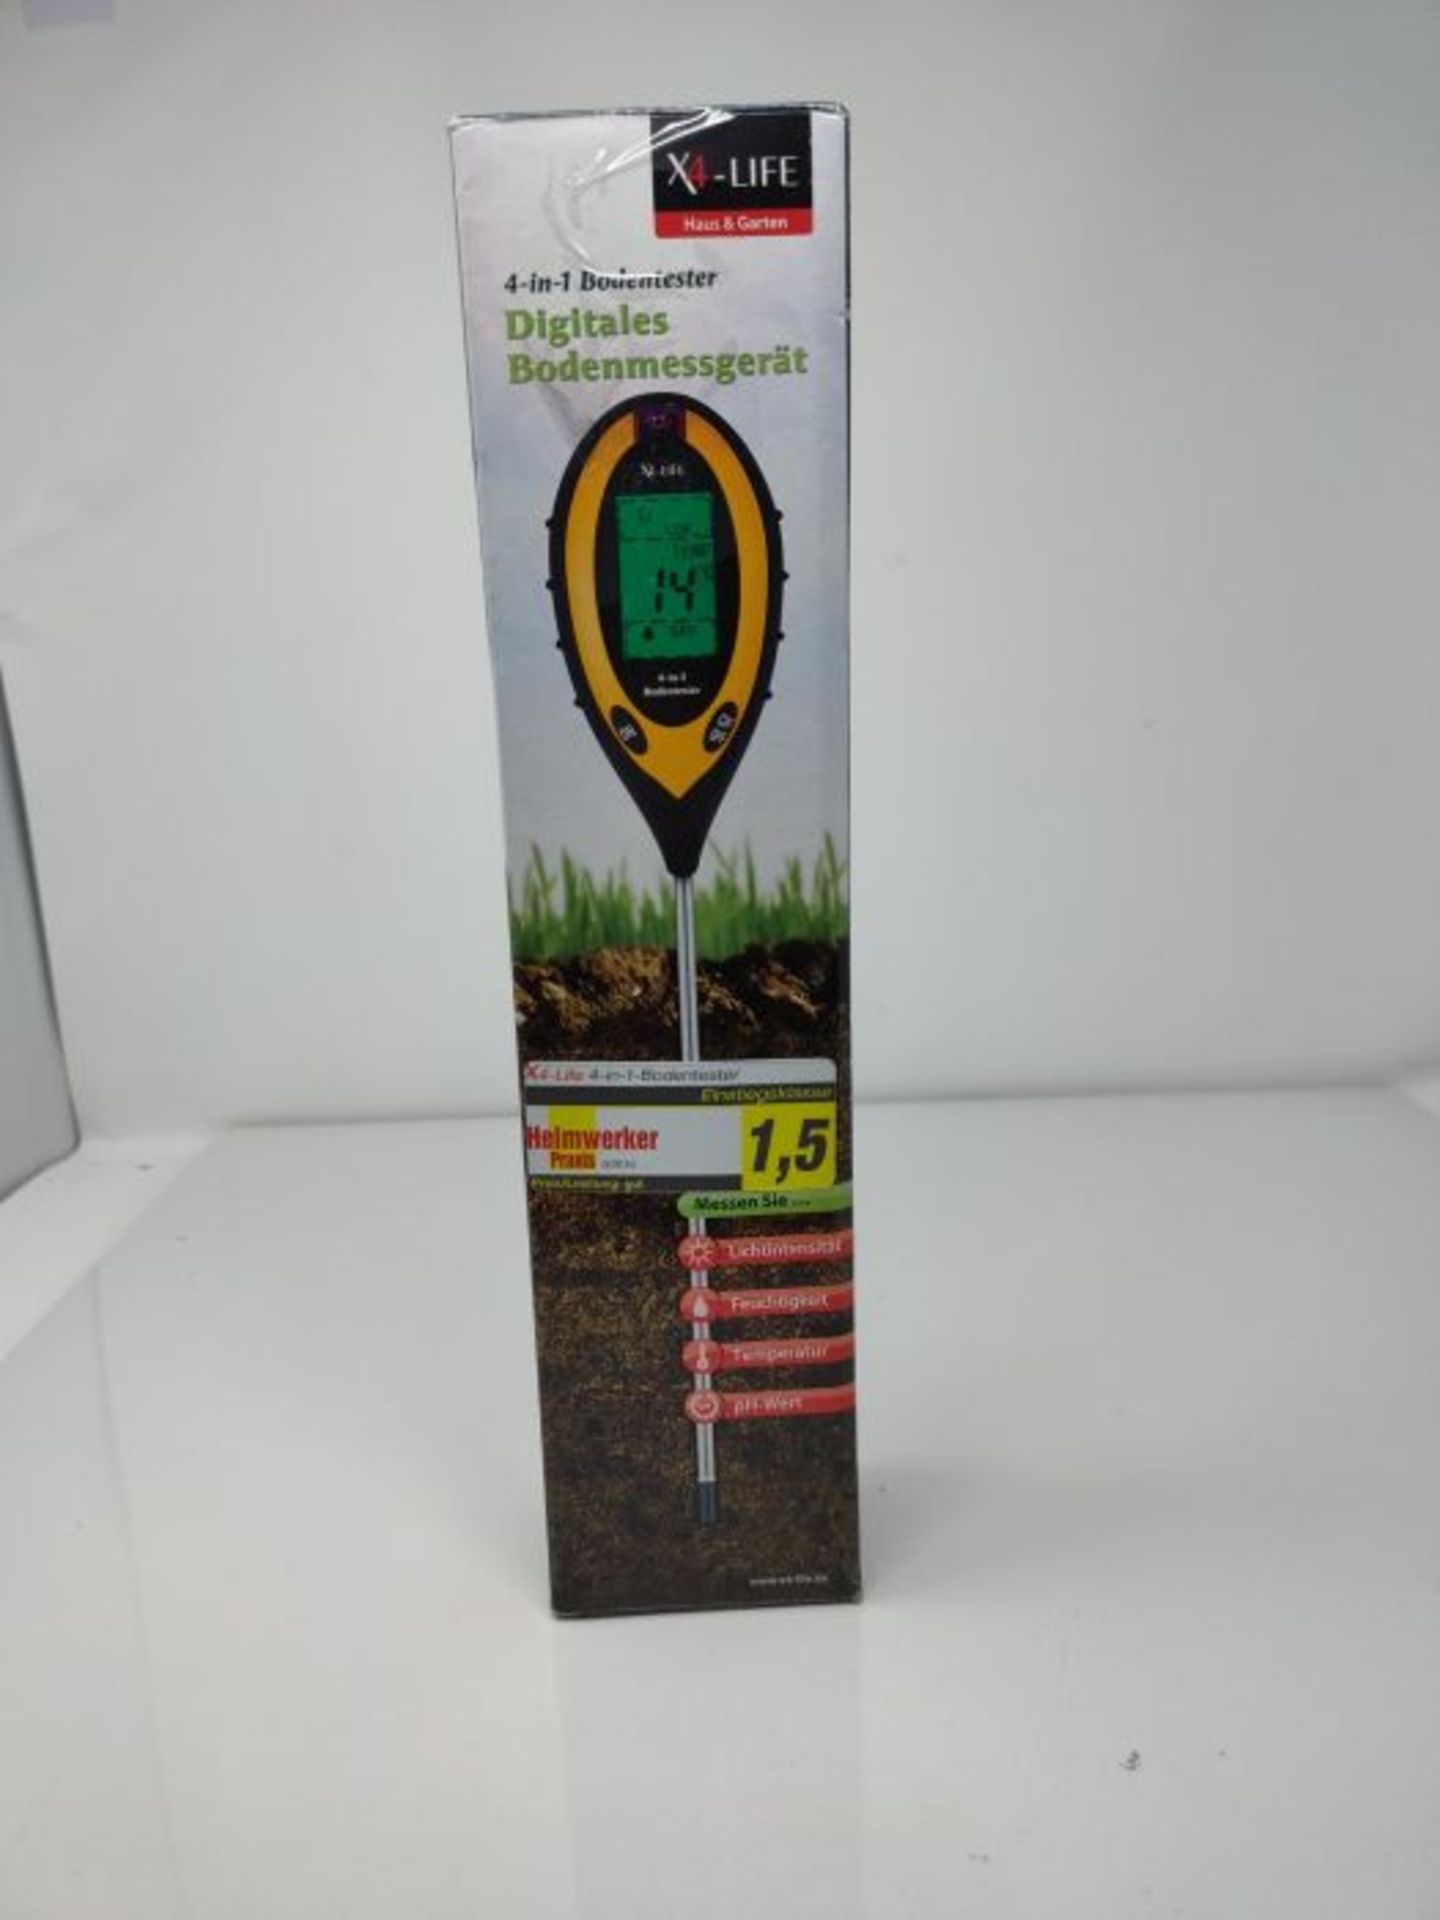 X4-LIFE 700403 4-in-1 Ground Tester Digital Ground Measuring Device - Image 2 of 3